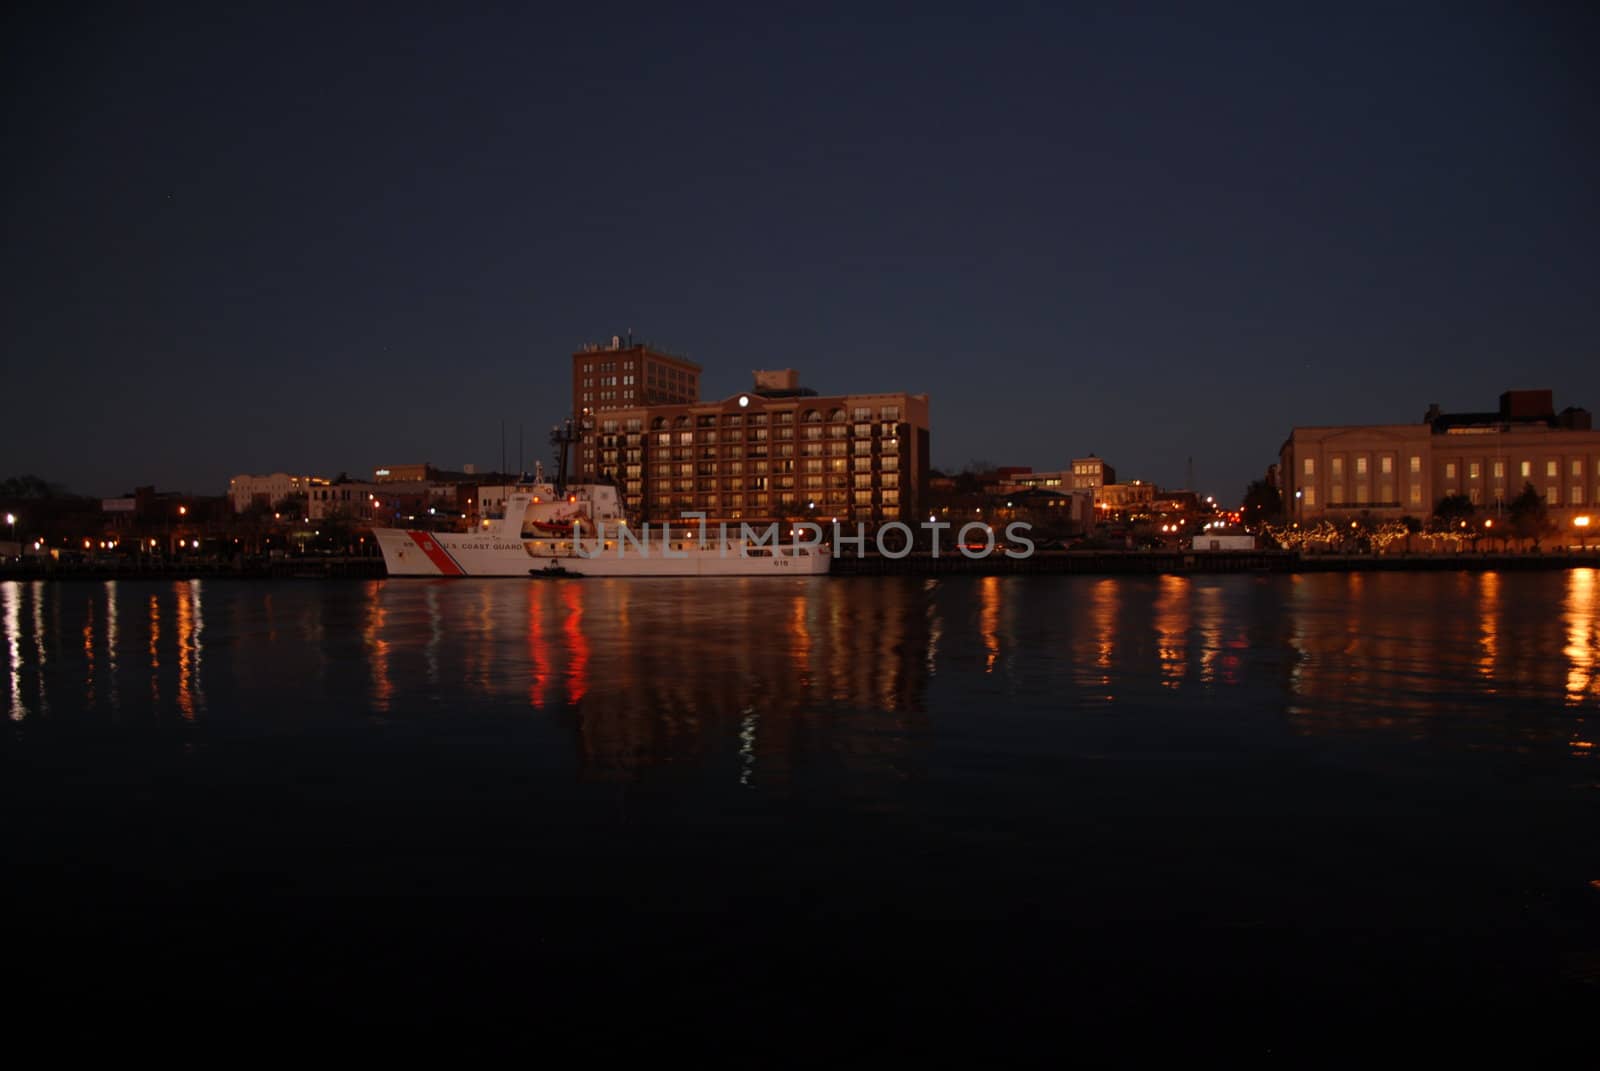 View along the river at night in Wilmington. The coast gaurd cutter is in dock.